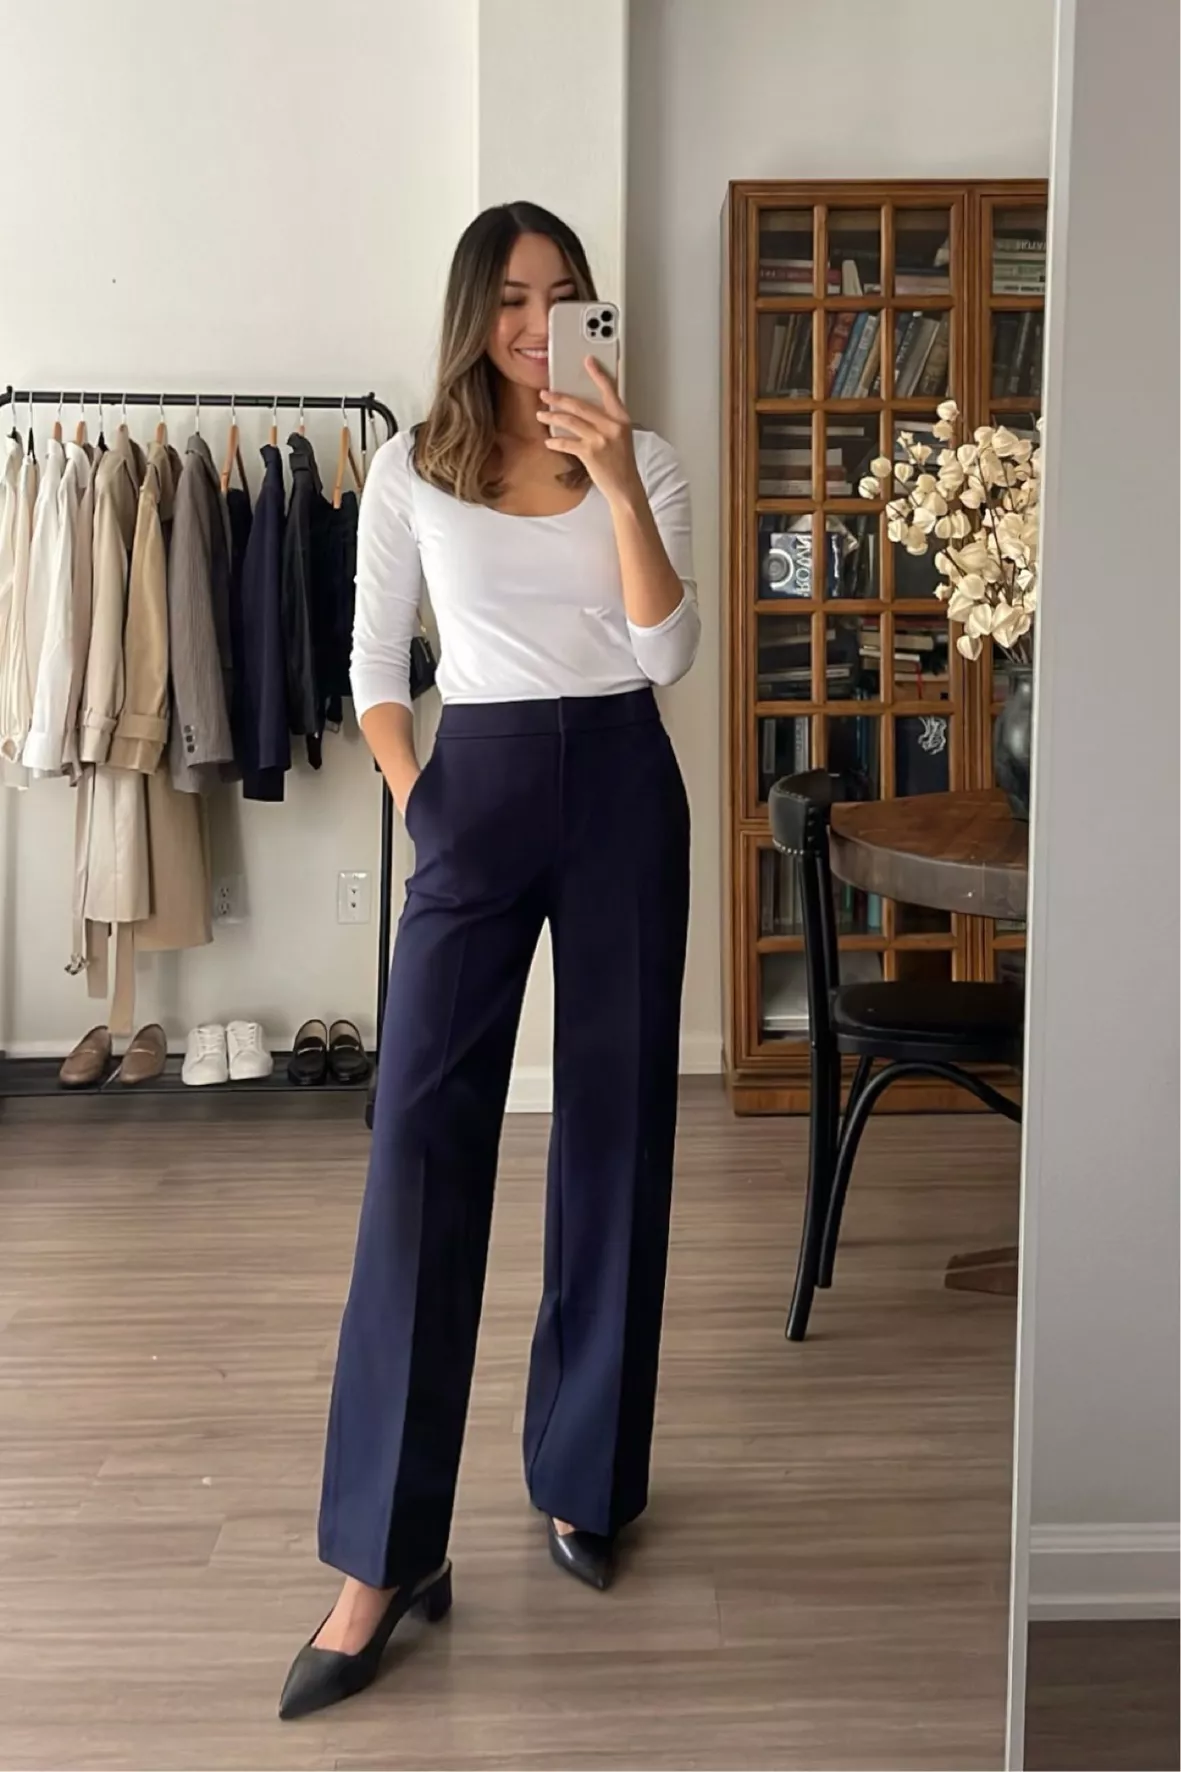 WIDE LEG PANTS OUTFIT IDEAS  STYLISH AND CLASSY WAYS TO STYLE